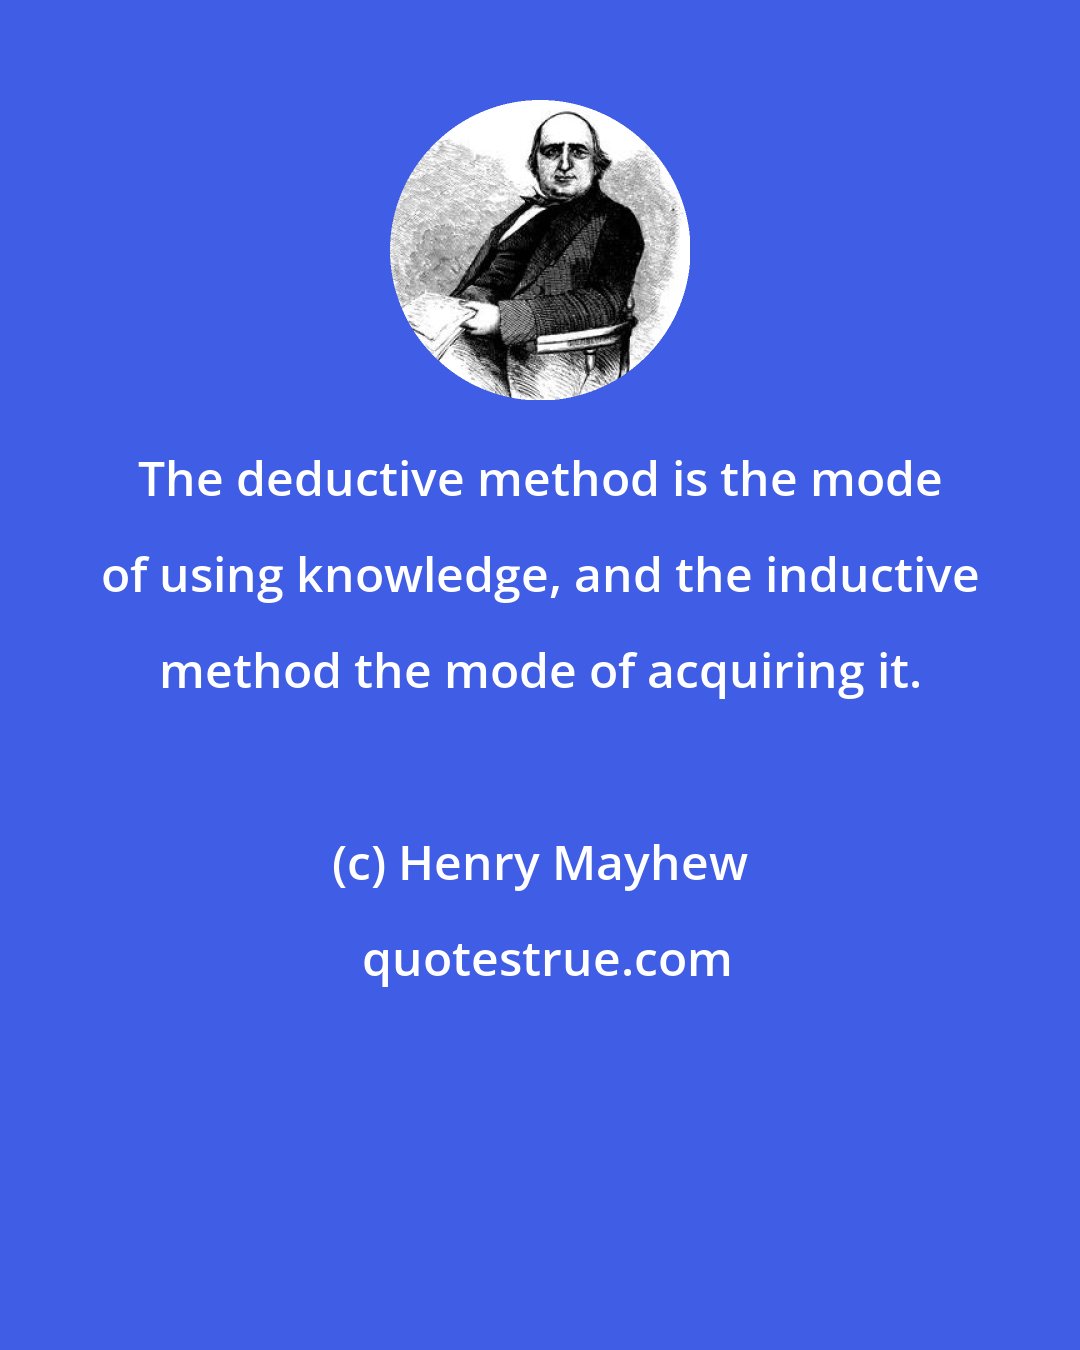 Henry Mayhew: The deductive method is the mode of using knowledge, and the inductive method the mode of acquiring it.